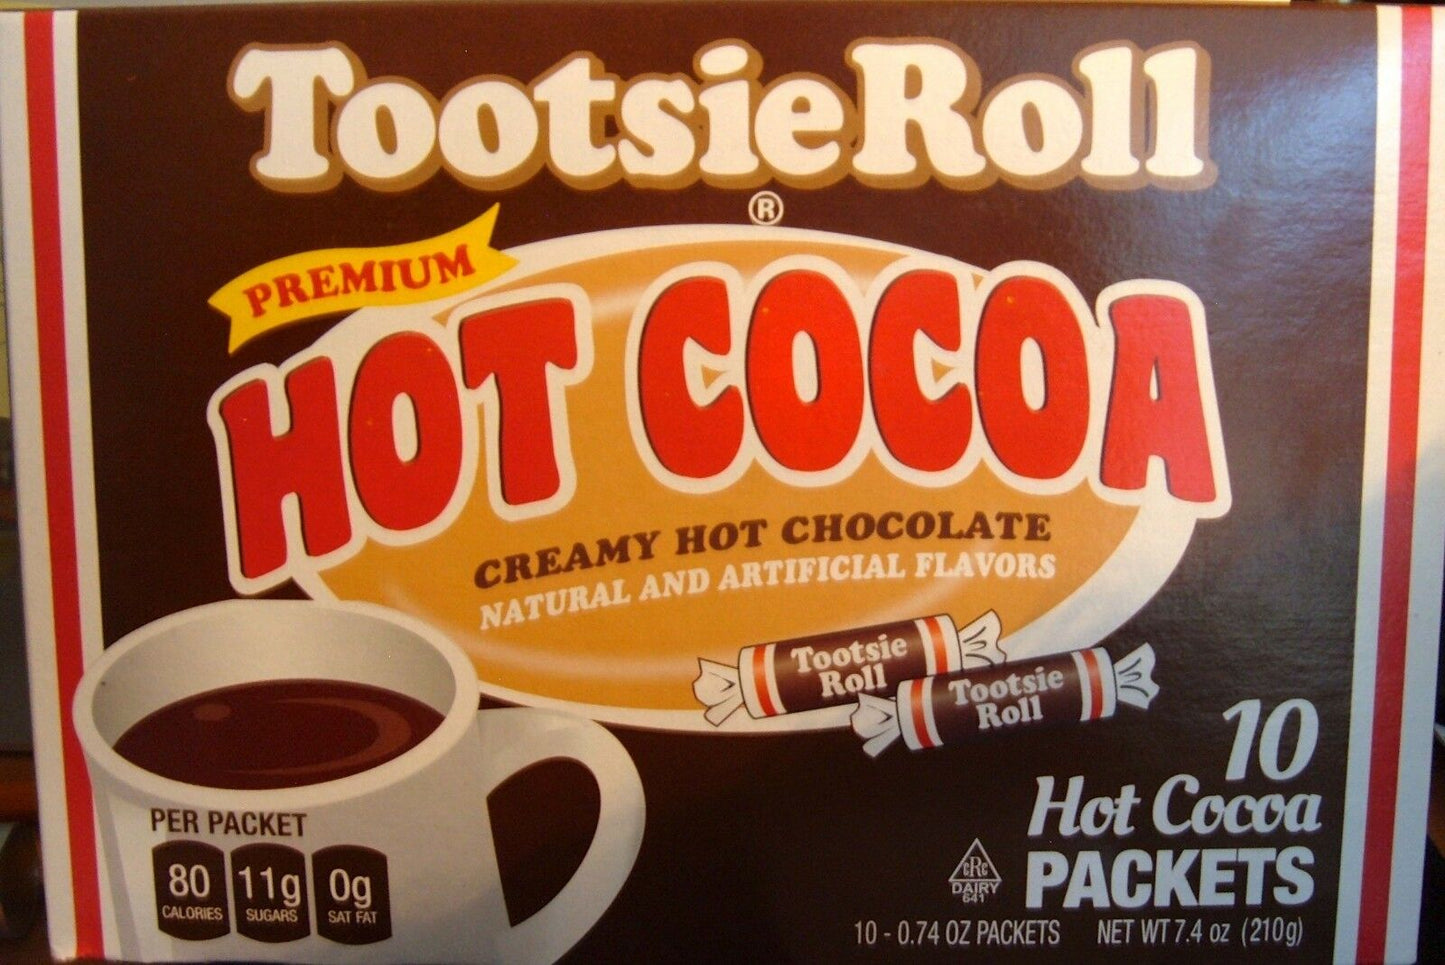 COCOA HOT TOOTSIE ROLL: Hot Cocoa Tootsie Roll Packets, 10 pc - Vending Business Solutions